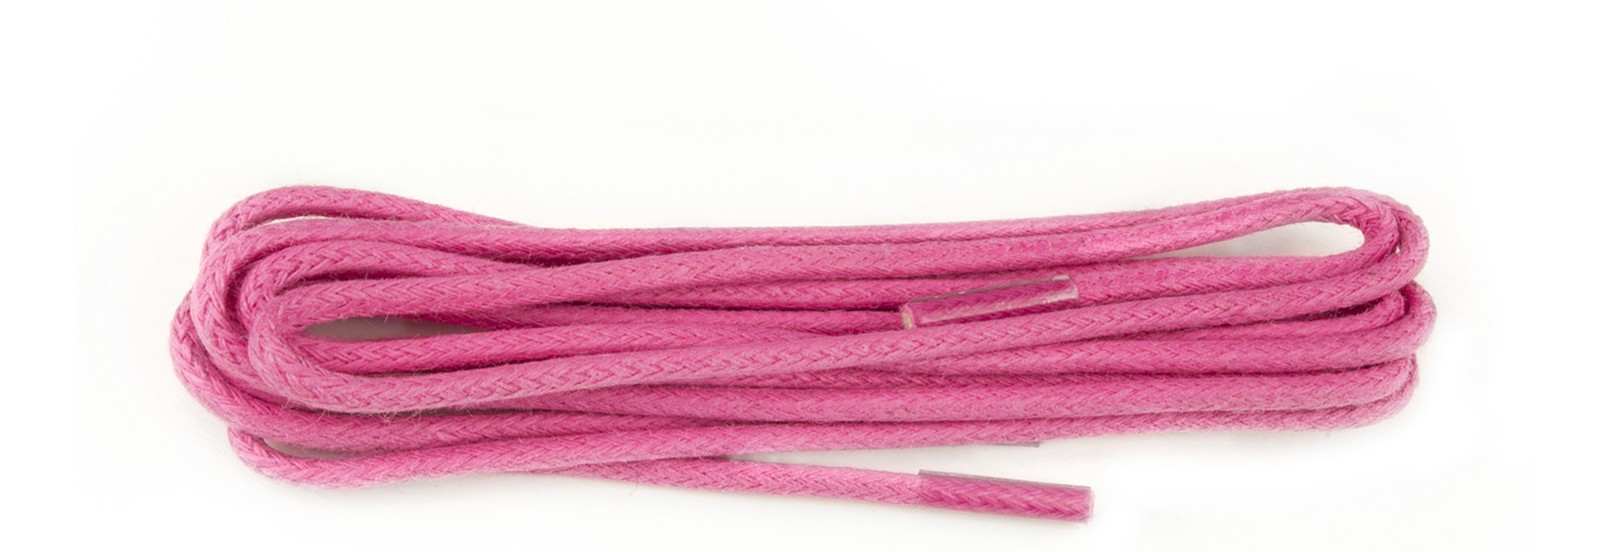 Shoestring Shoe Lace Pink Waxed 2mm Round 75cm